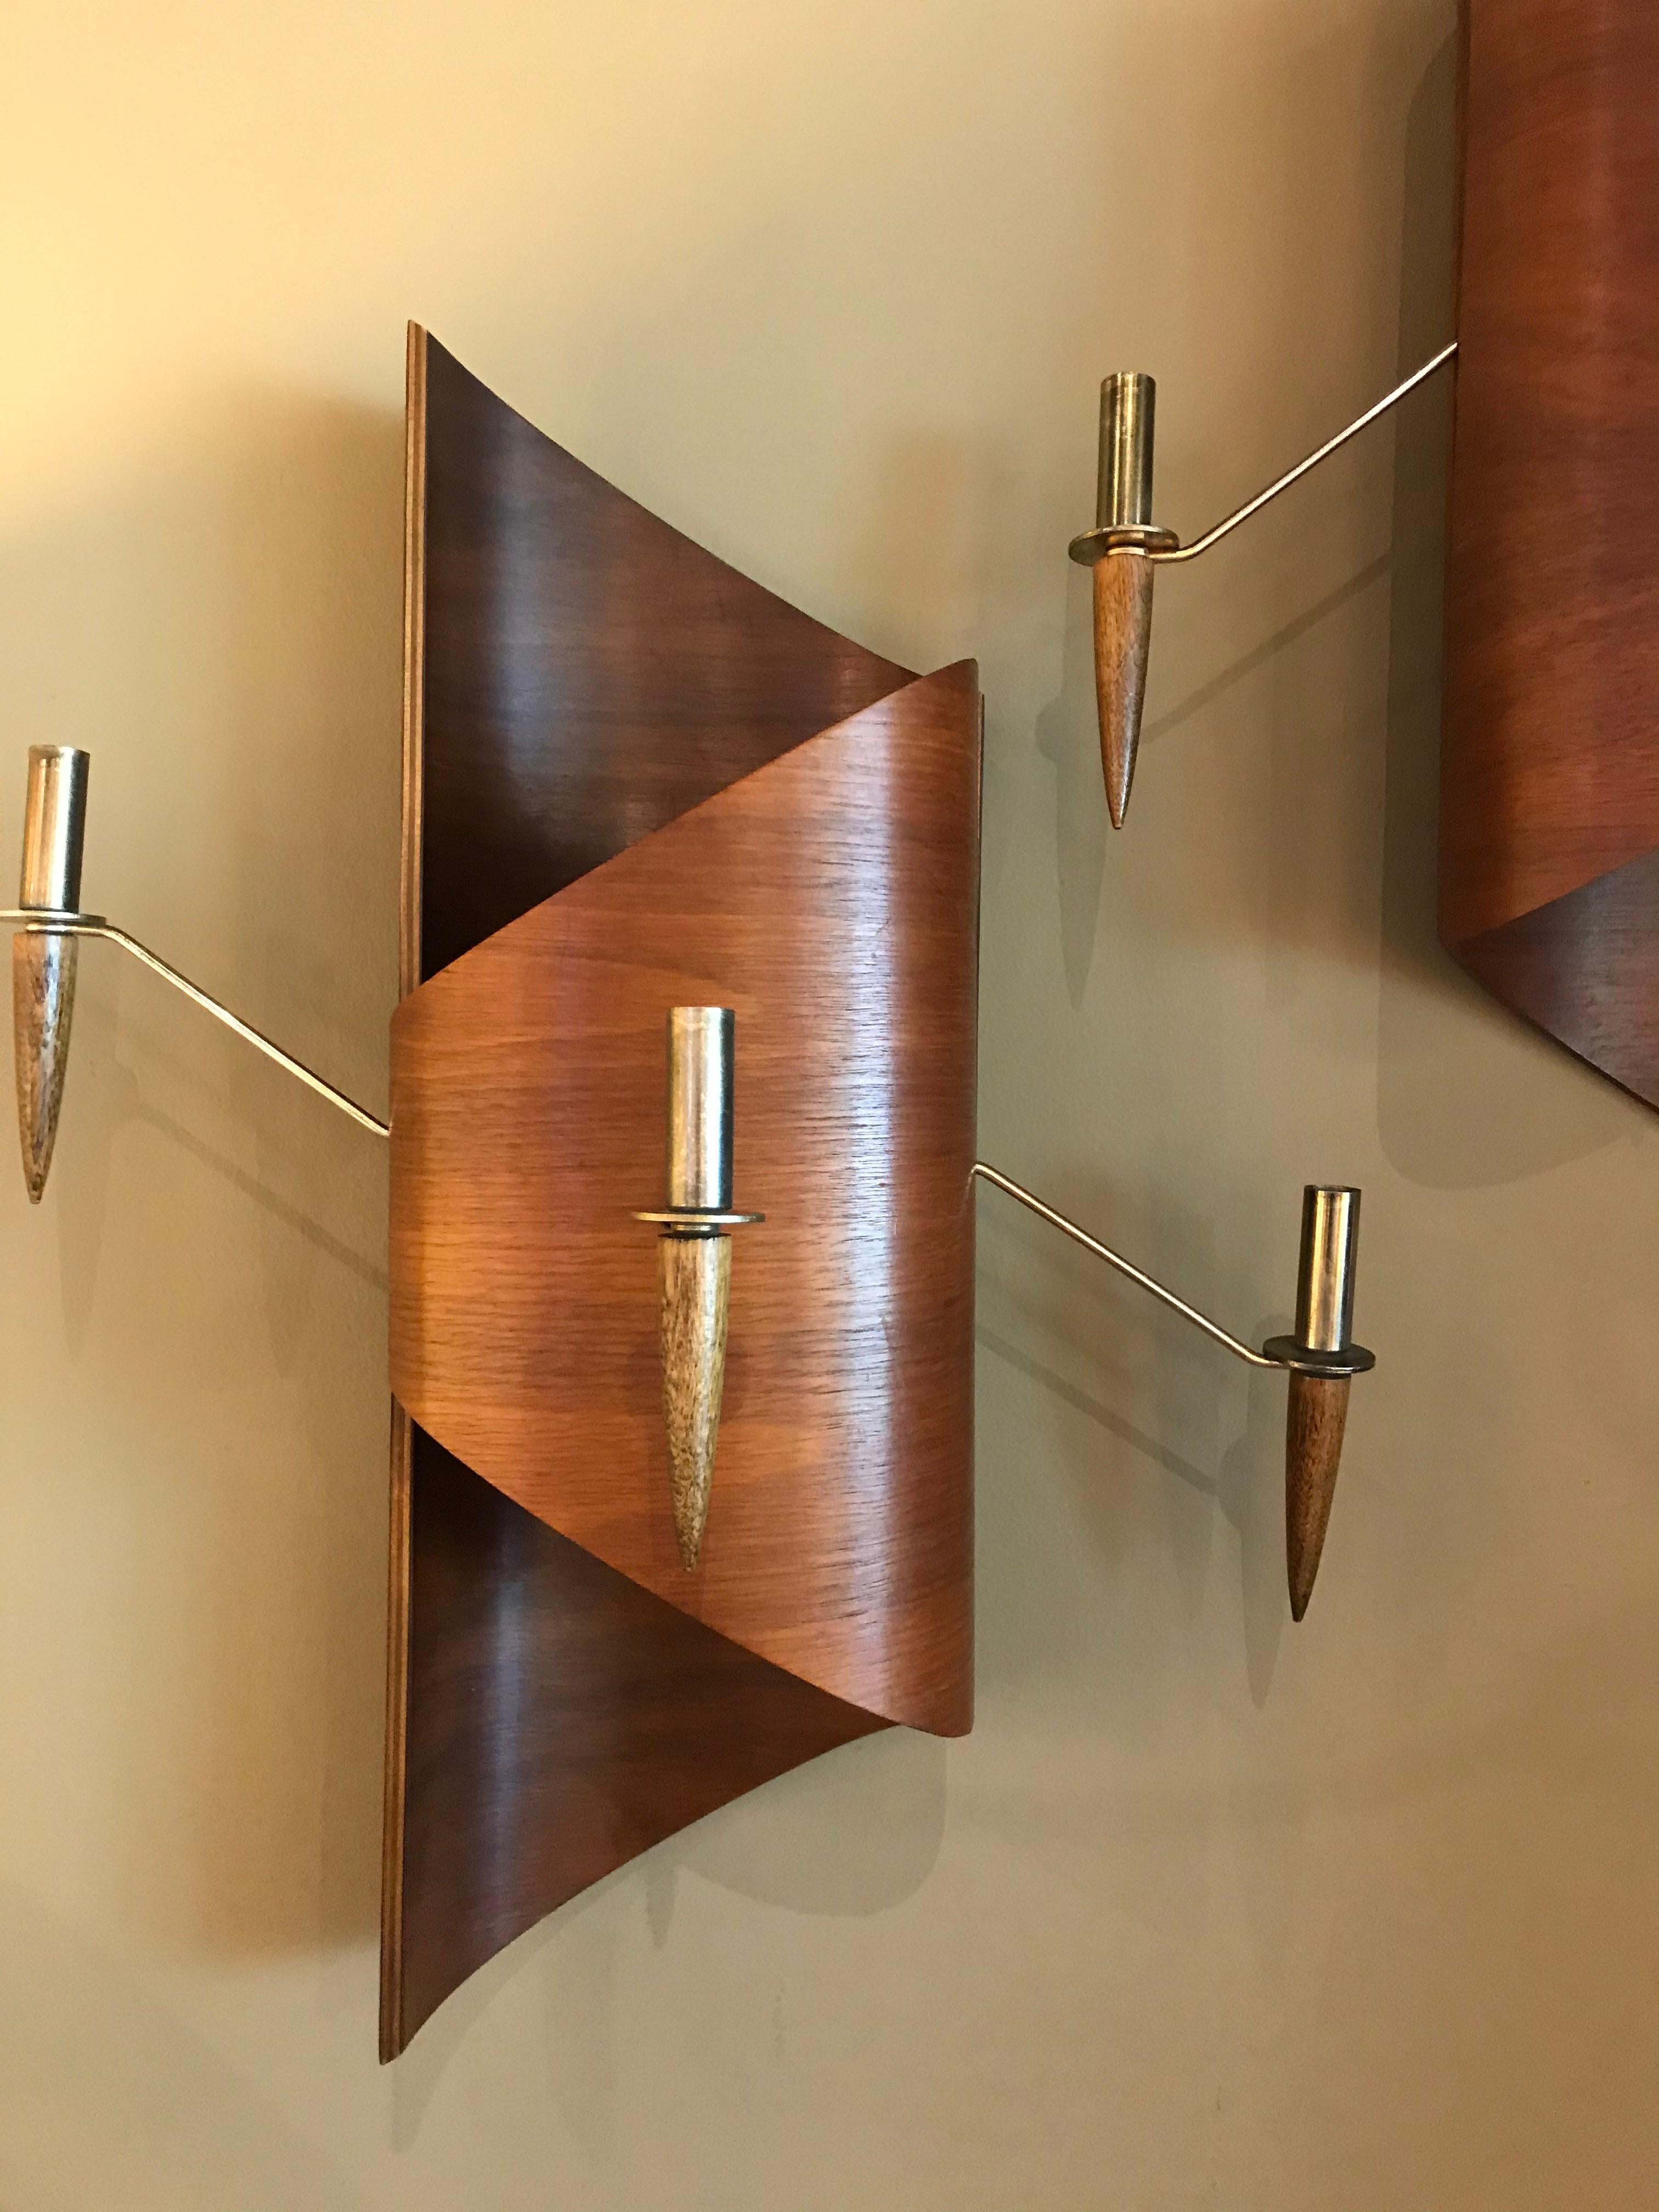 Highly unusual and decorative pair of formed teak midcentury Italian candle sconces. Juxtaposed curled scrolling shapes with brass wire and teak wood candleholders reaching out to the sides and front. Three candleholders each. Screw holes for the